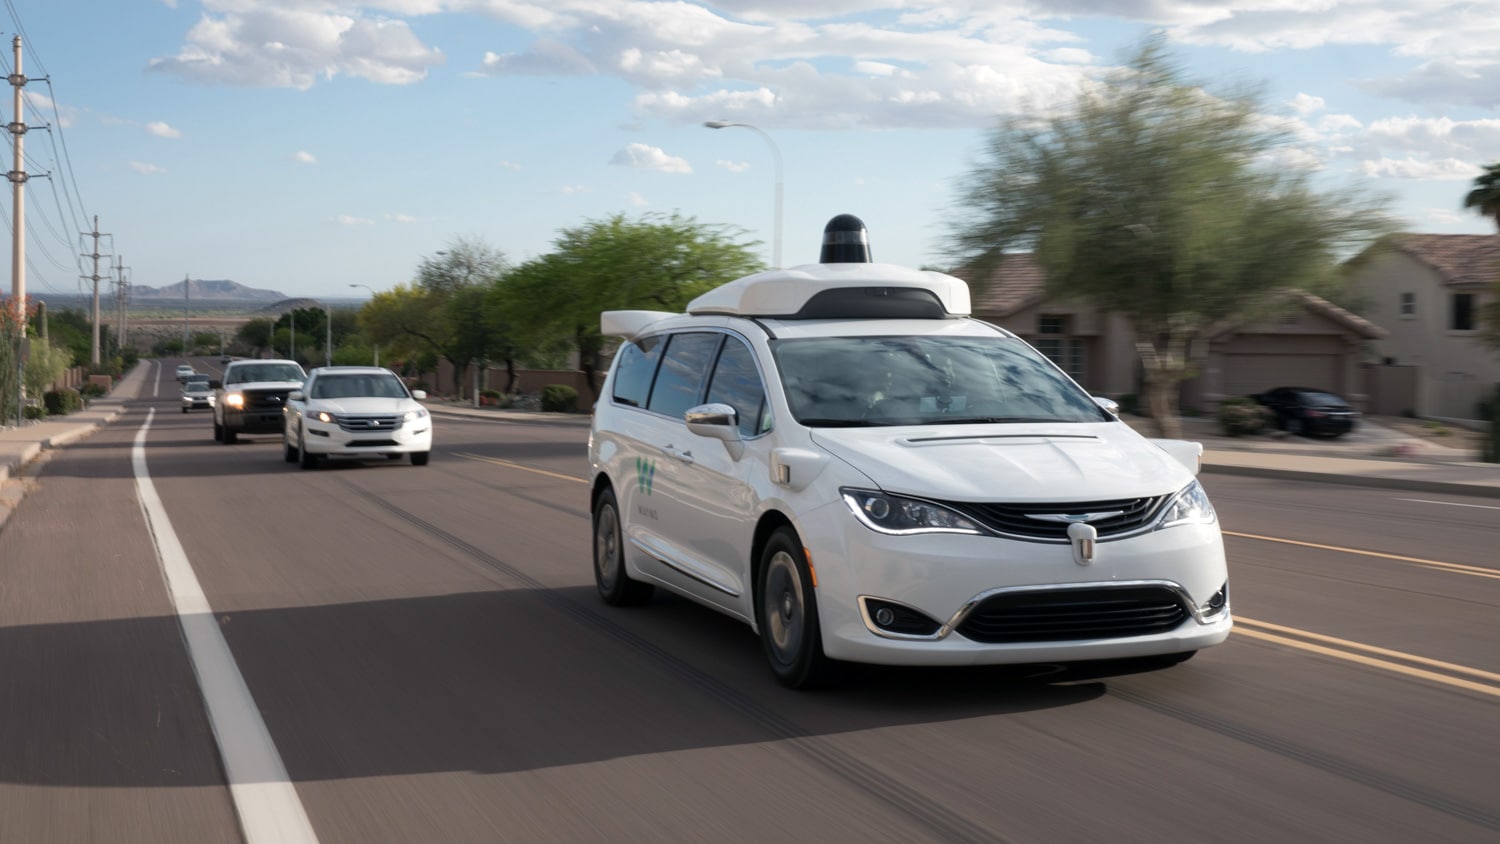 AVIA unveils federal policy recommendations to maximize autonomous vehicle potential